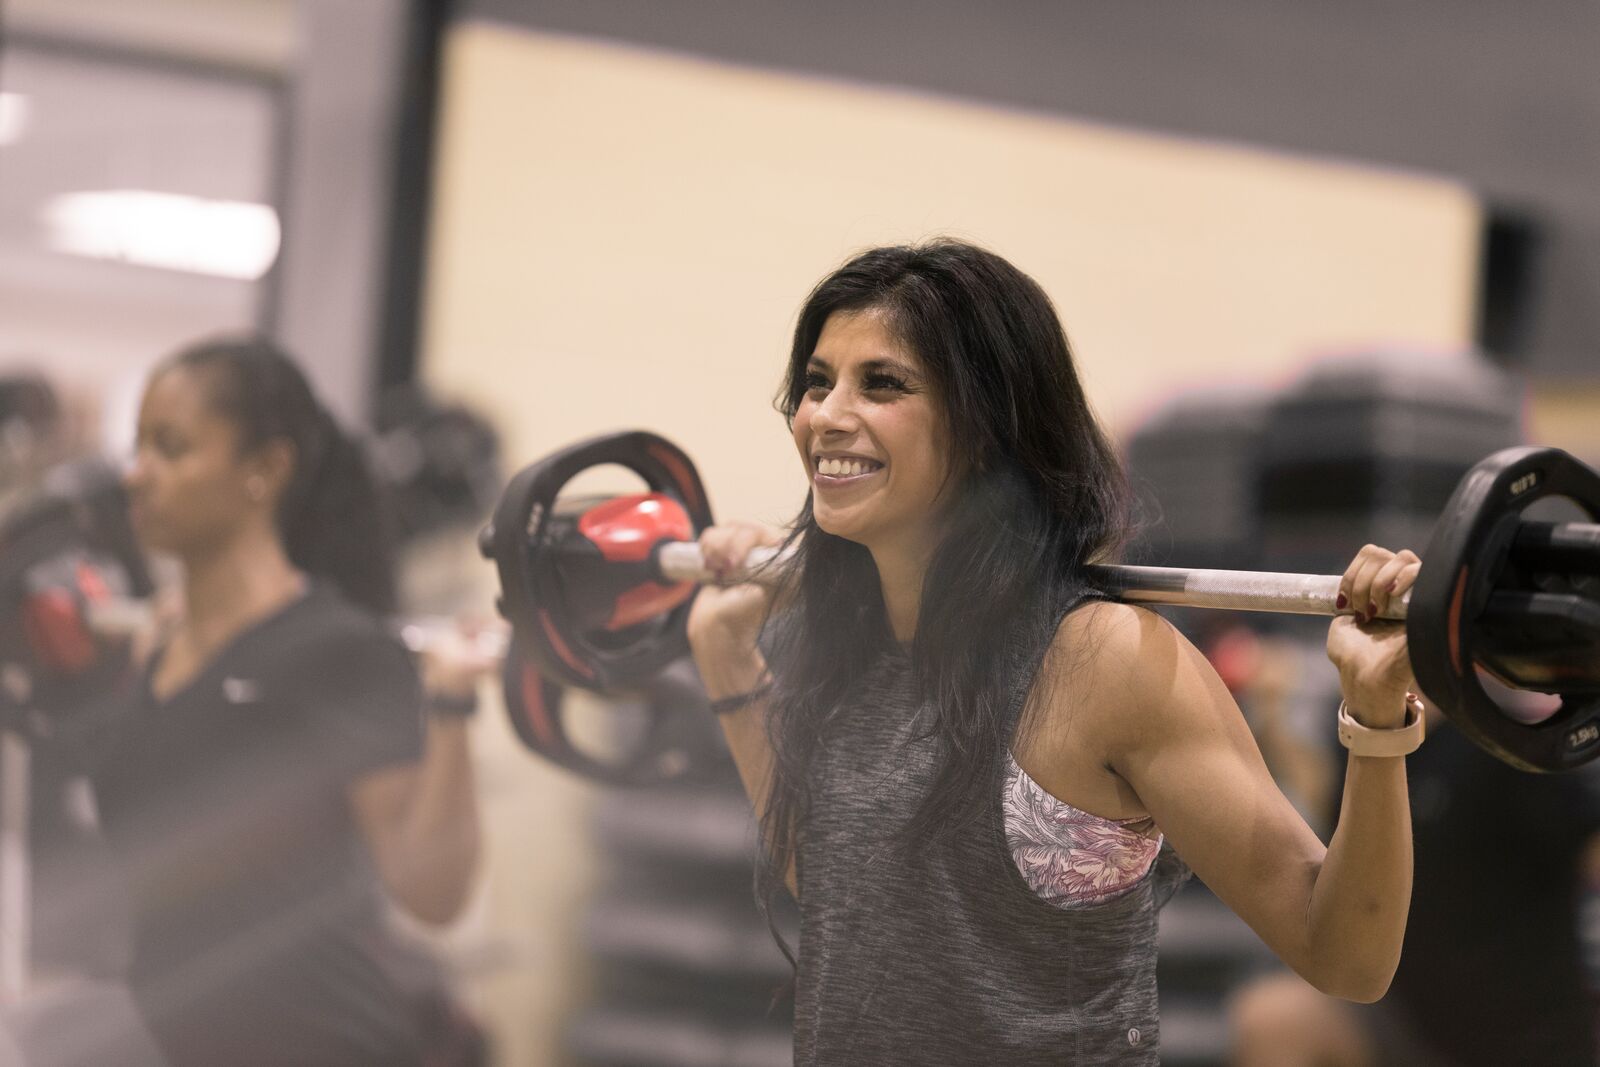 Woman taking BodyPump class at YMCA holding a barbell and smiling